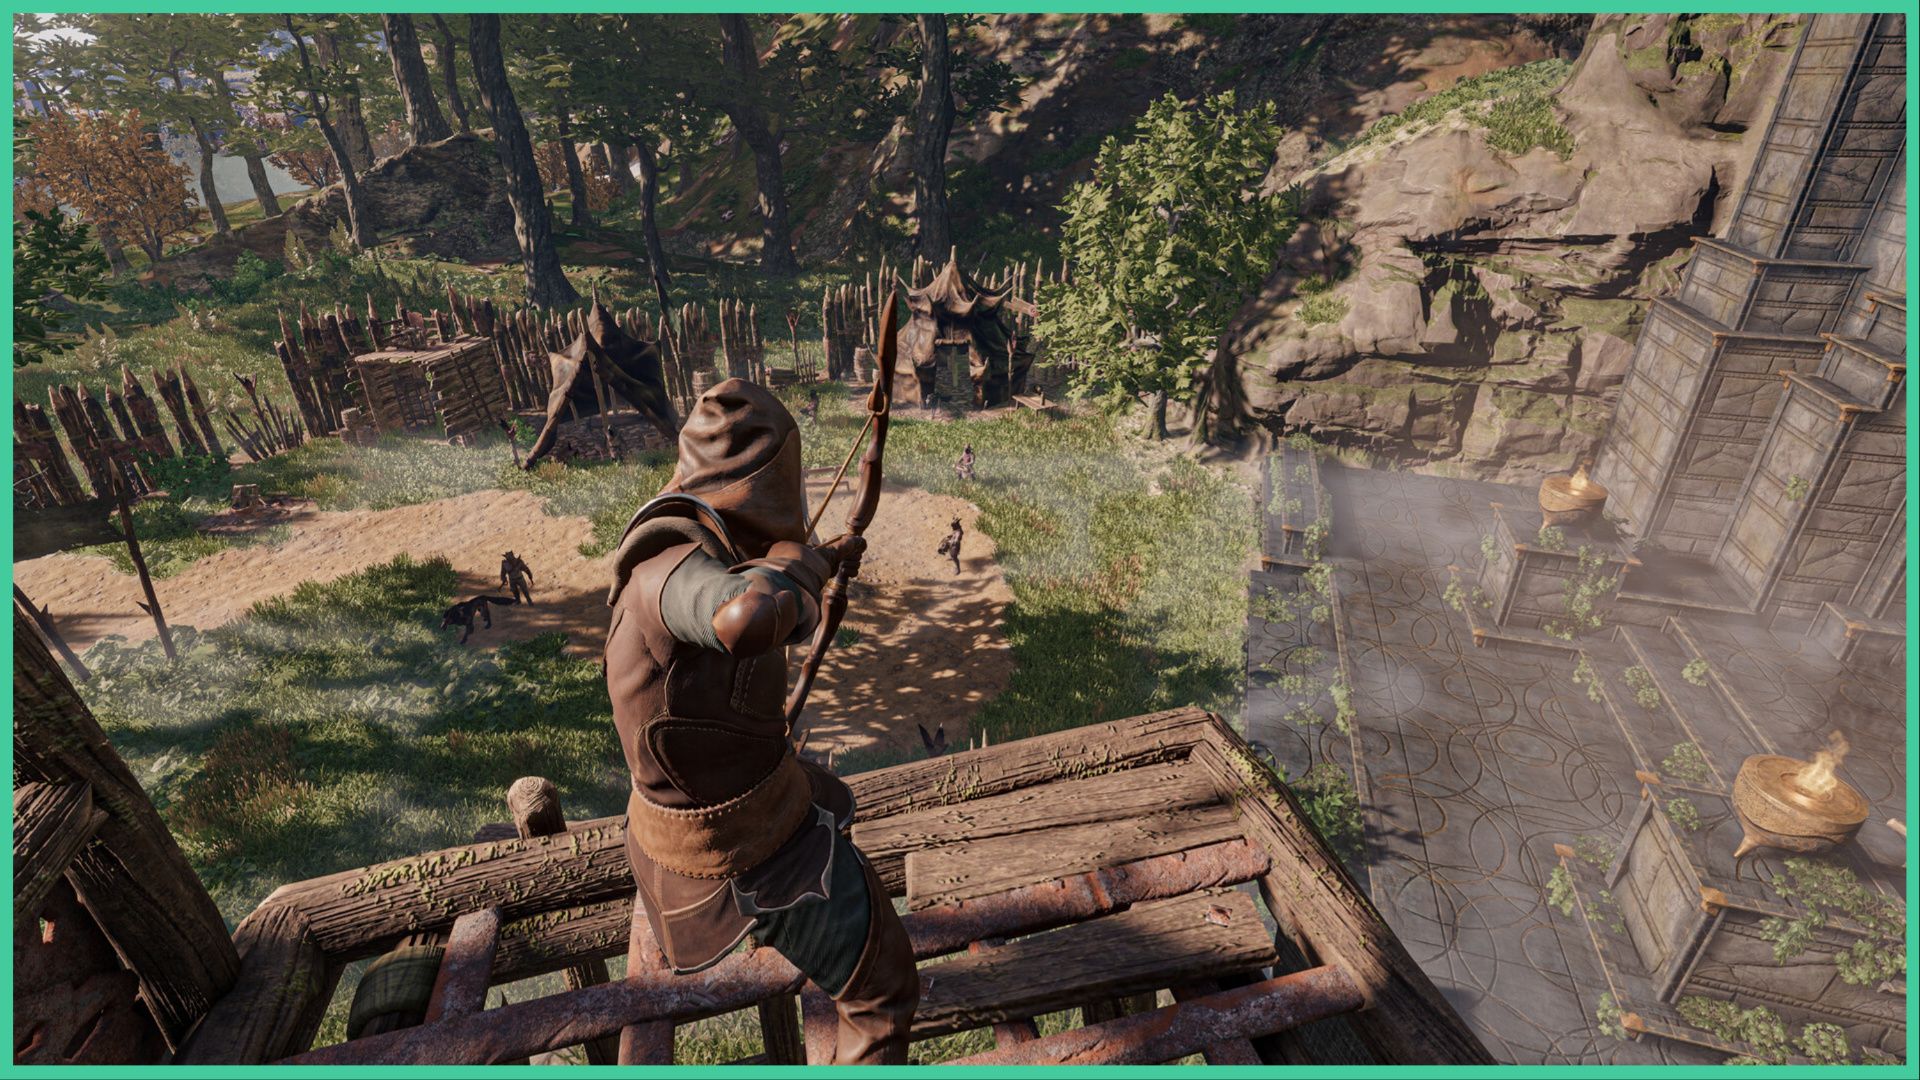 feature image for our enshrouded demo news, the image features a promo screenshot from the game of a character standing on a wooden platform as they aim their bow and arrow towards the enemies below, the environment around them is mostly made up of large trees, grass, and wooden structures that resemble a camp, there are stone steps to the right that lead to a stone building, with two bowls lit on fire at either side